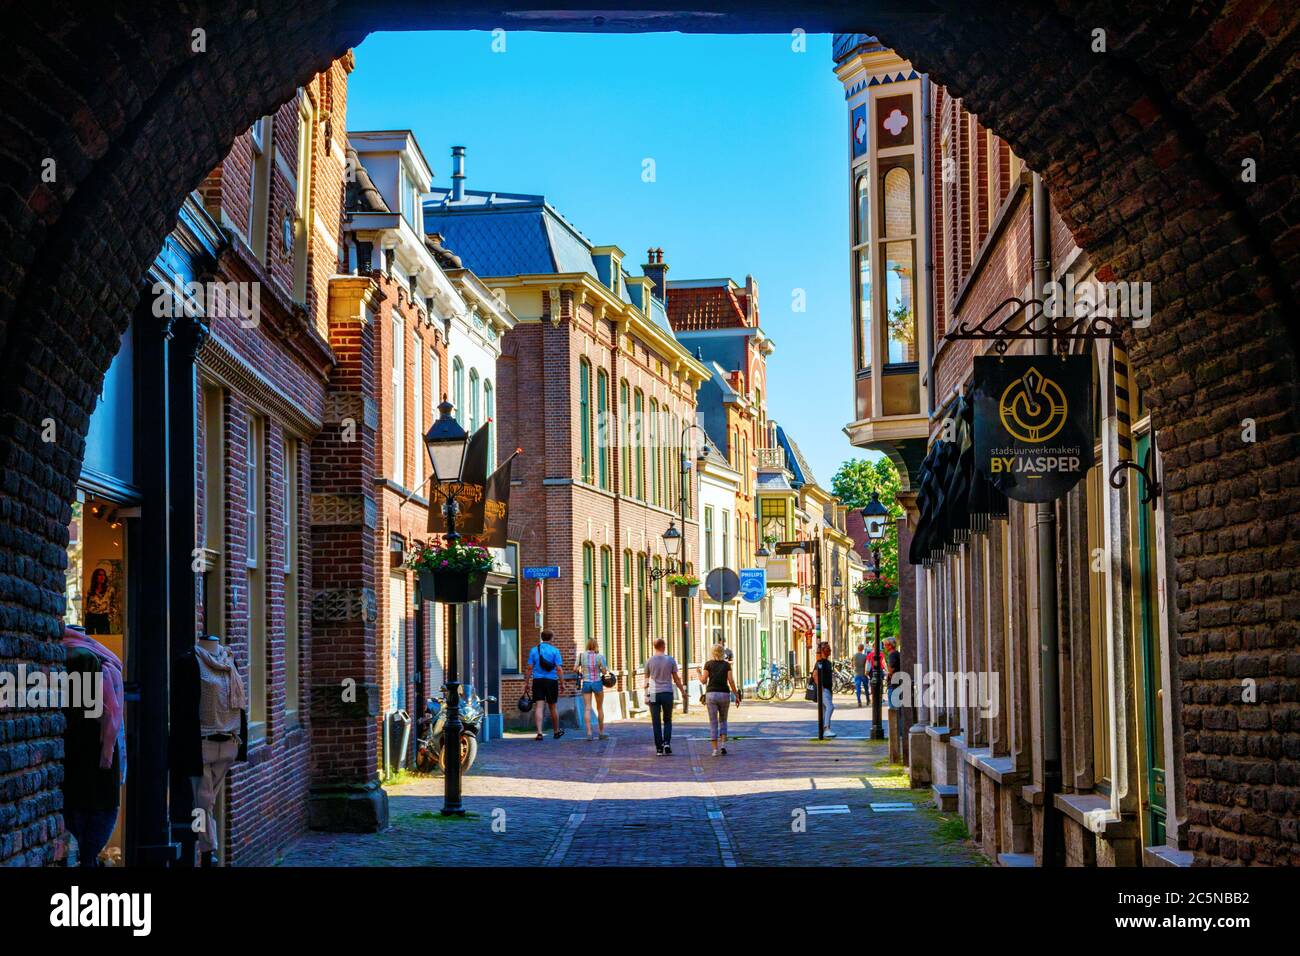 Culemborg. Old city centre with the Varkensmarkt (Pigs Market Square) viewed from the Binnenpoort (Town Gate) on a sunny afternoon. The Netherlands. Stock Photo